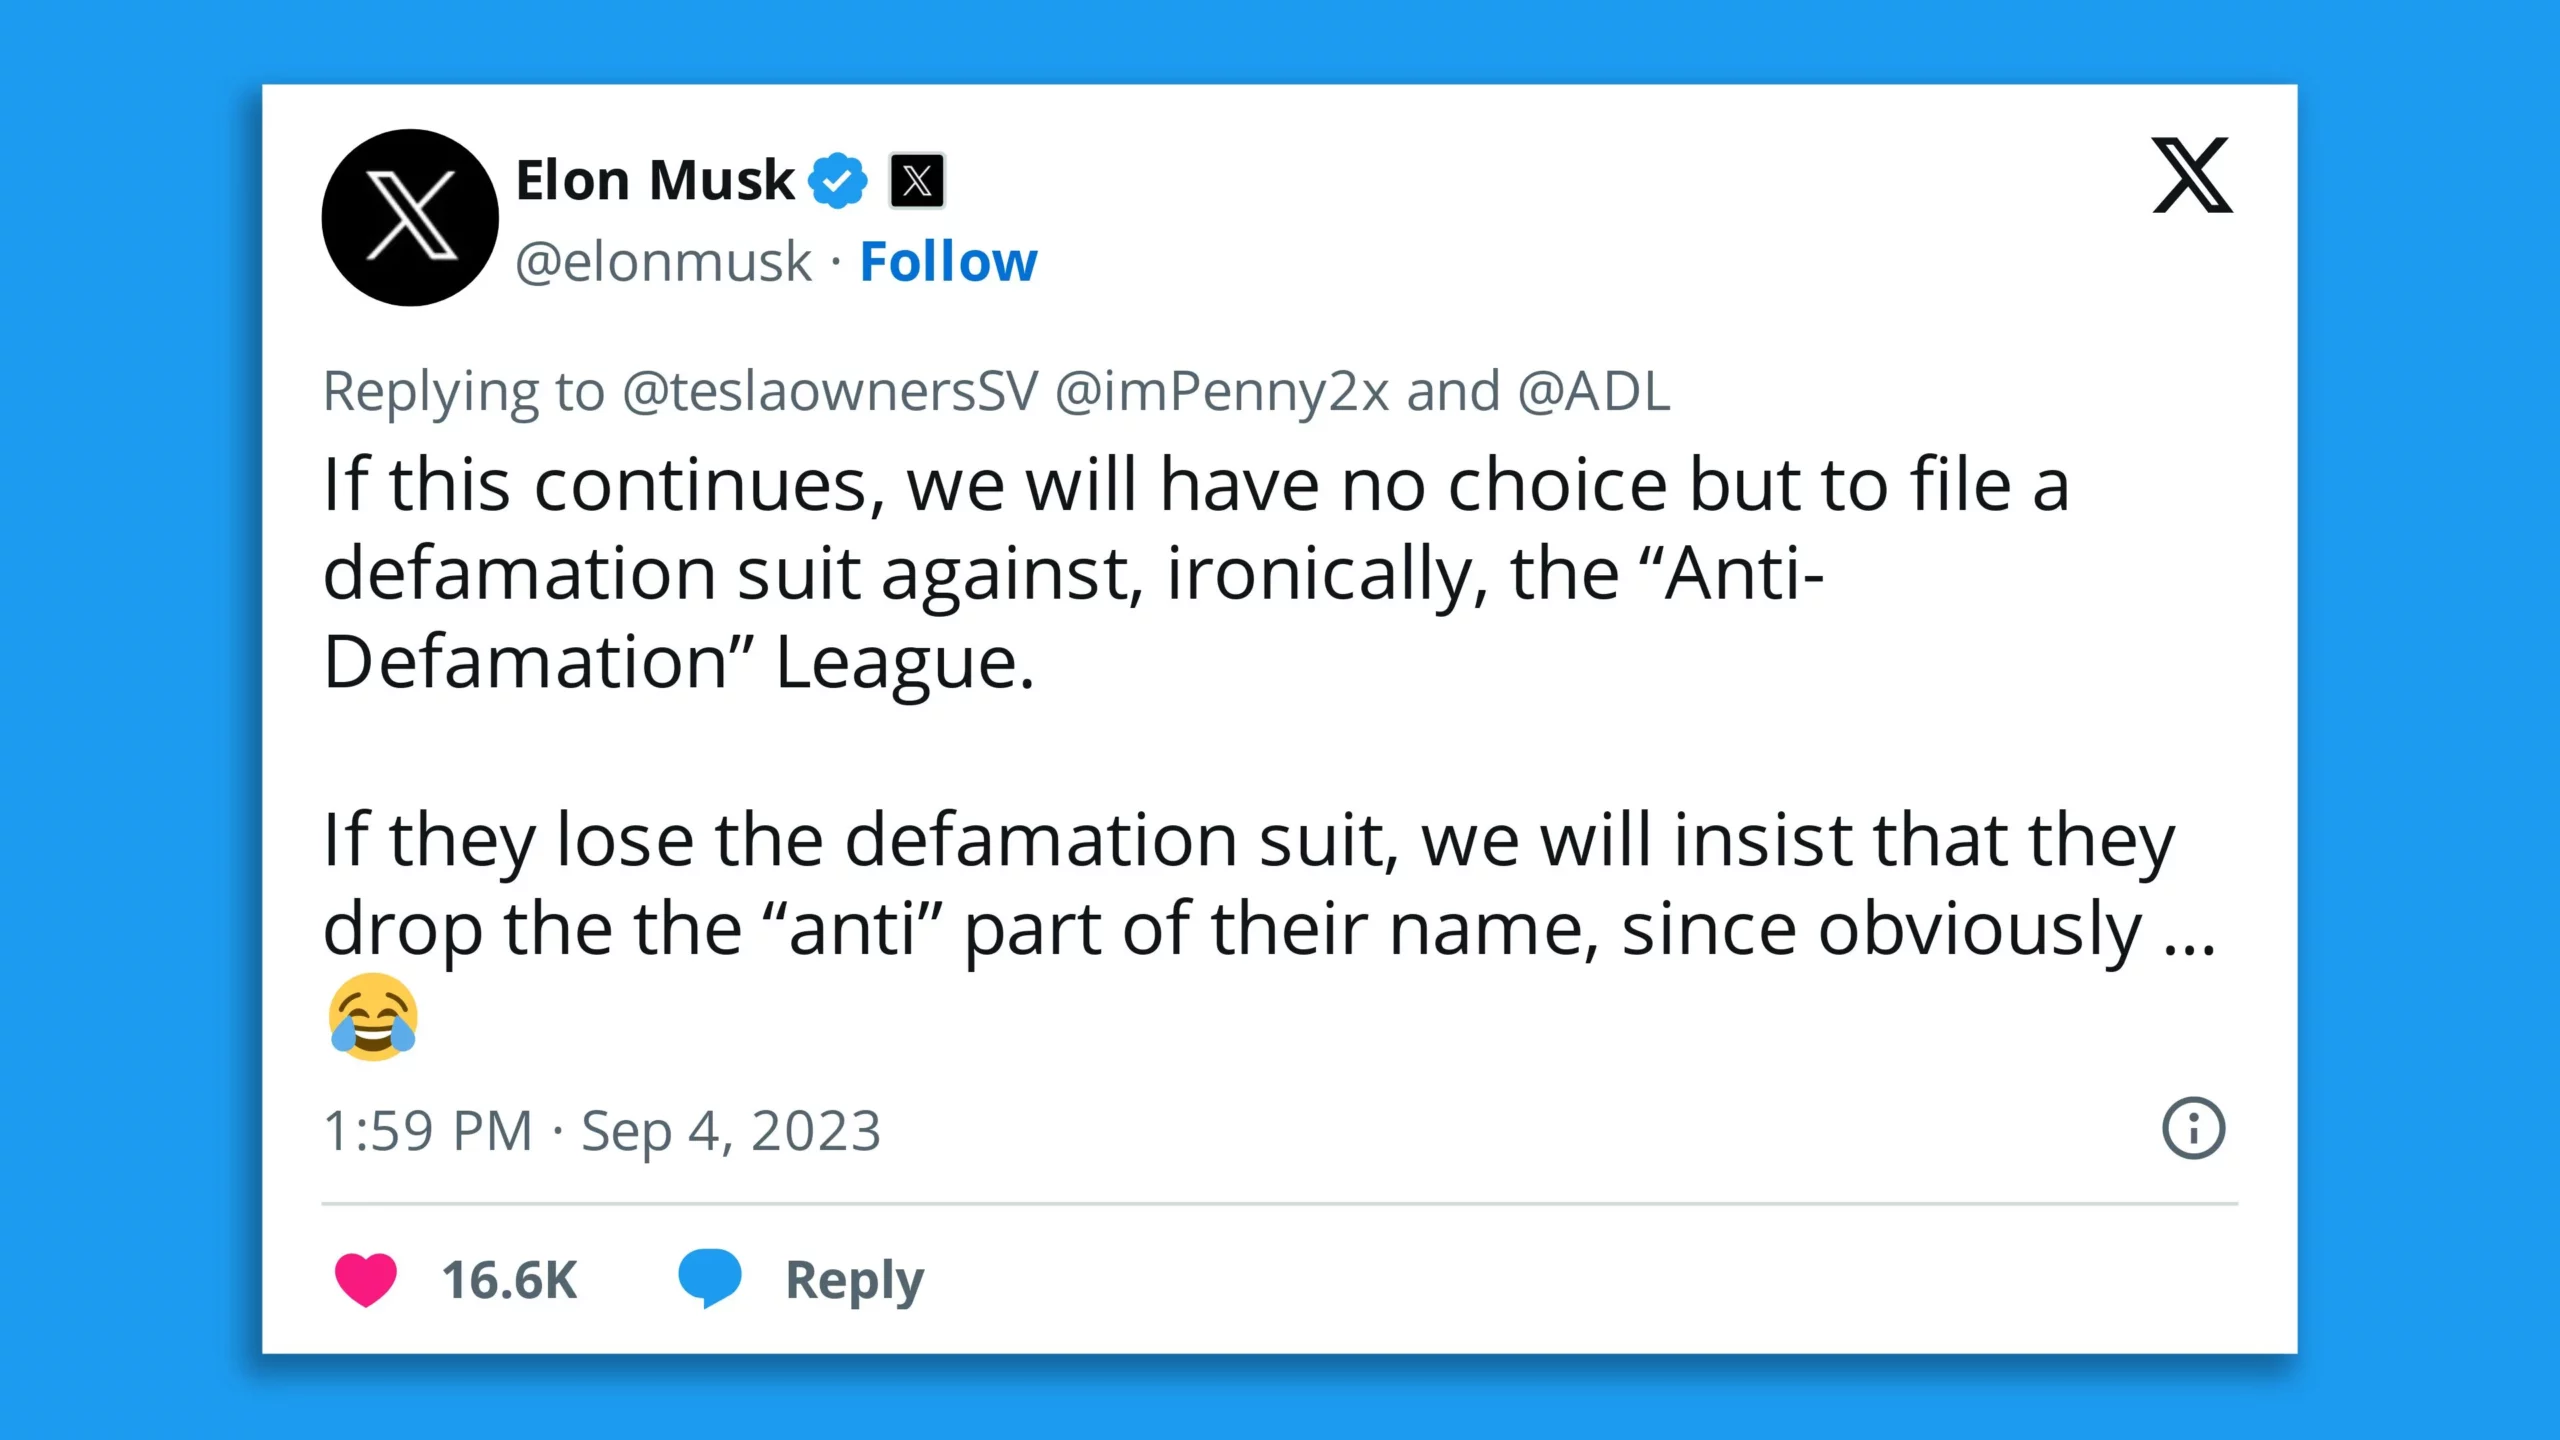 The ADL and Elon Musk may fight it out in court.